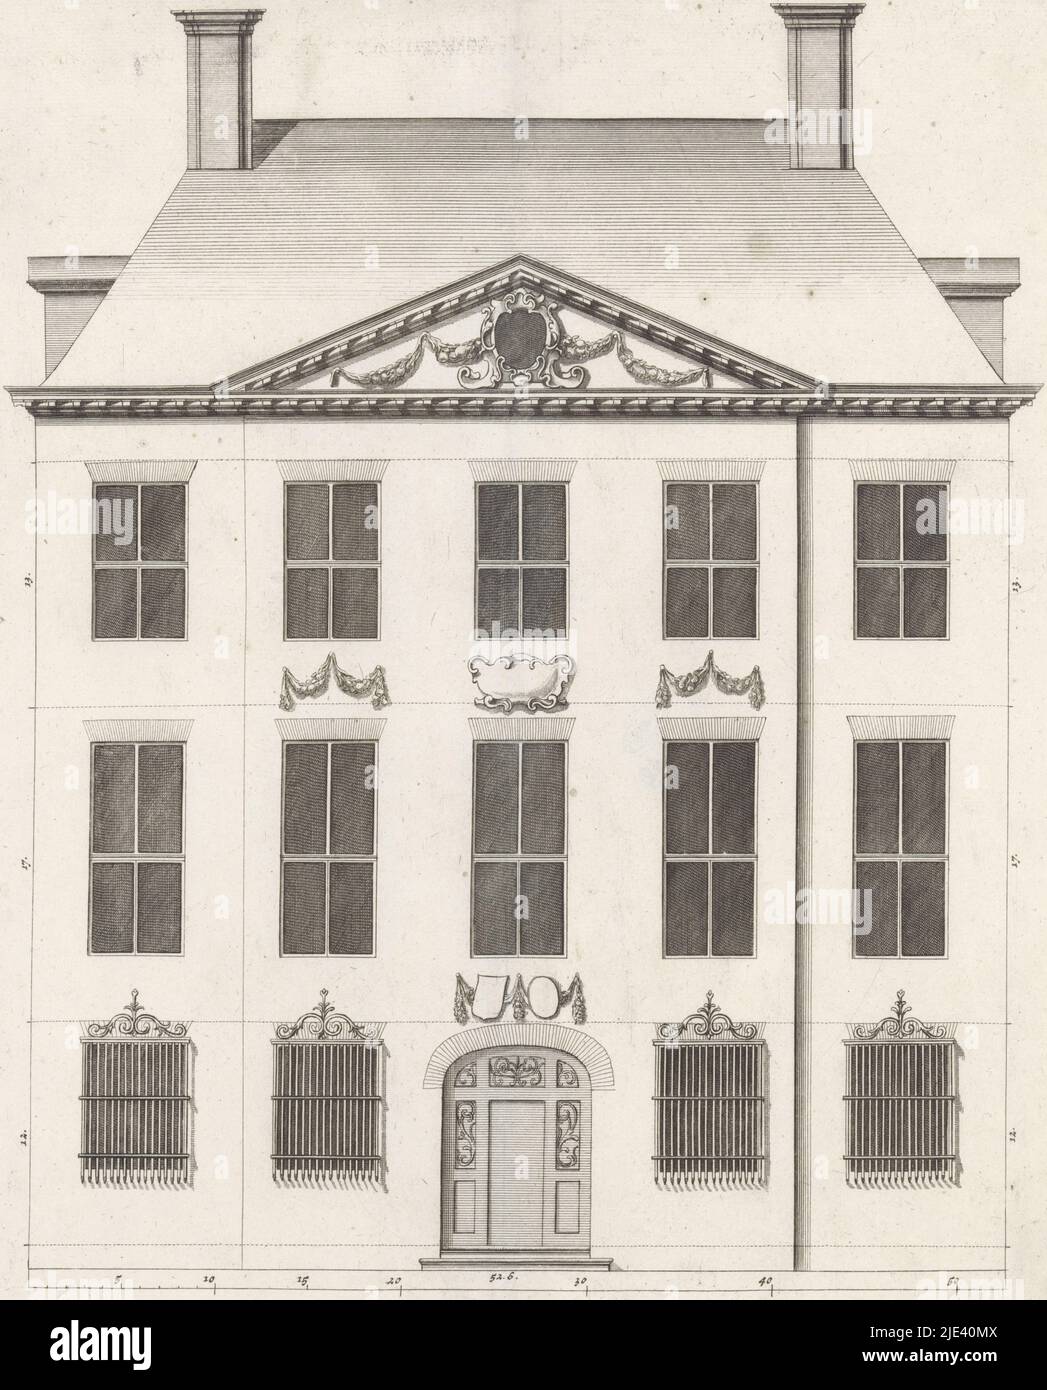 Frontage of a dwelling house on the Keizersgracht in Amsterdam, Bastiaen Stopendael, after Philips Vinckboons (II), 1674, Frontage of a dwelling house on the Keizersgracht in Amsterdam, commissioned by Isaak Jan Nijs in 1664-1666. The house was designed by Philips Vingboons., print maker: Bastiaen Stopendael, (mentioned on object), Philips Vinckboons (II), (mentioned on object), Amsterdam, 1674, paper, etching, engraving, h 369 mm × w 286 mm Stock Photo